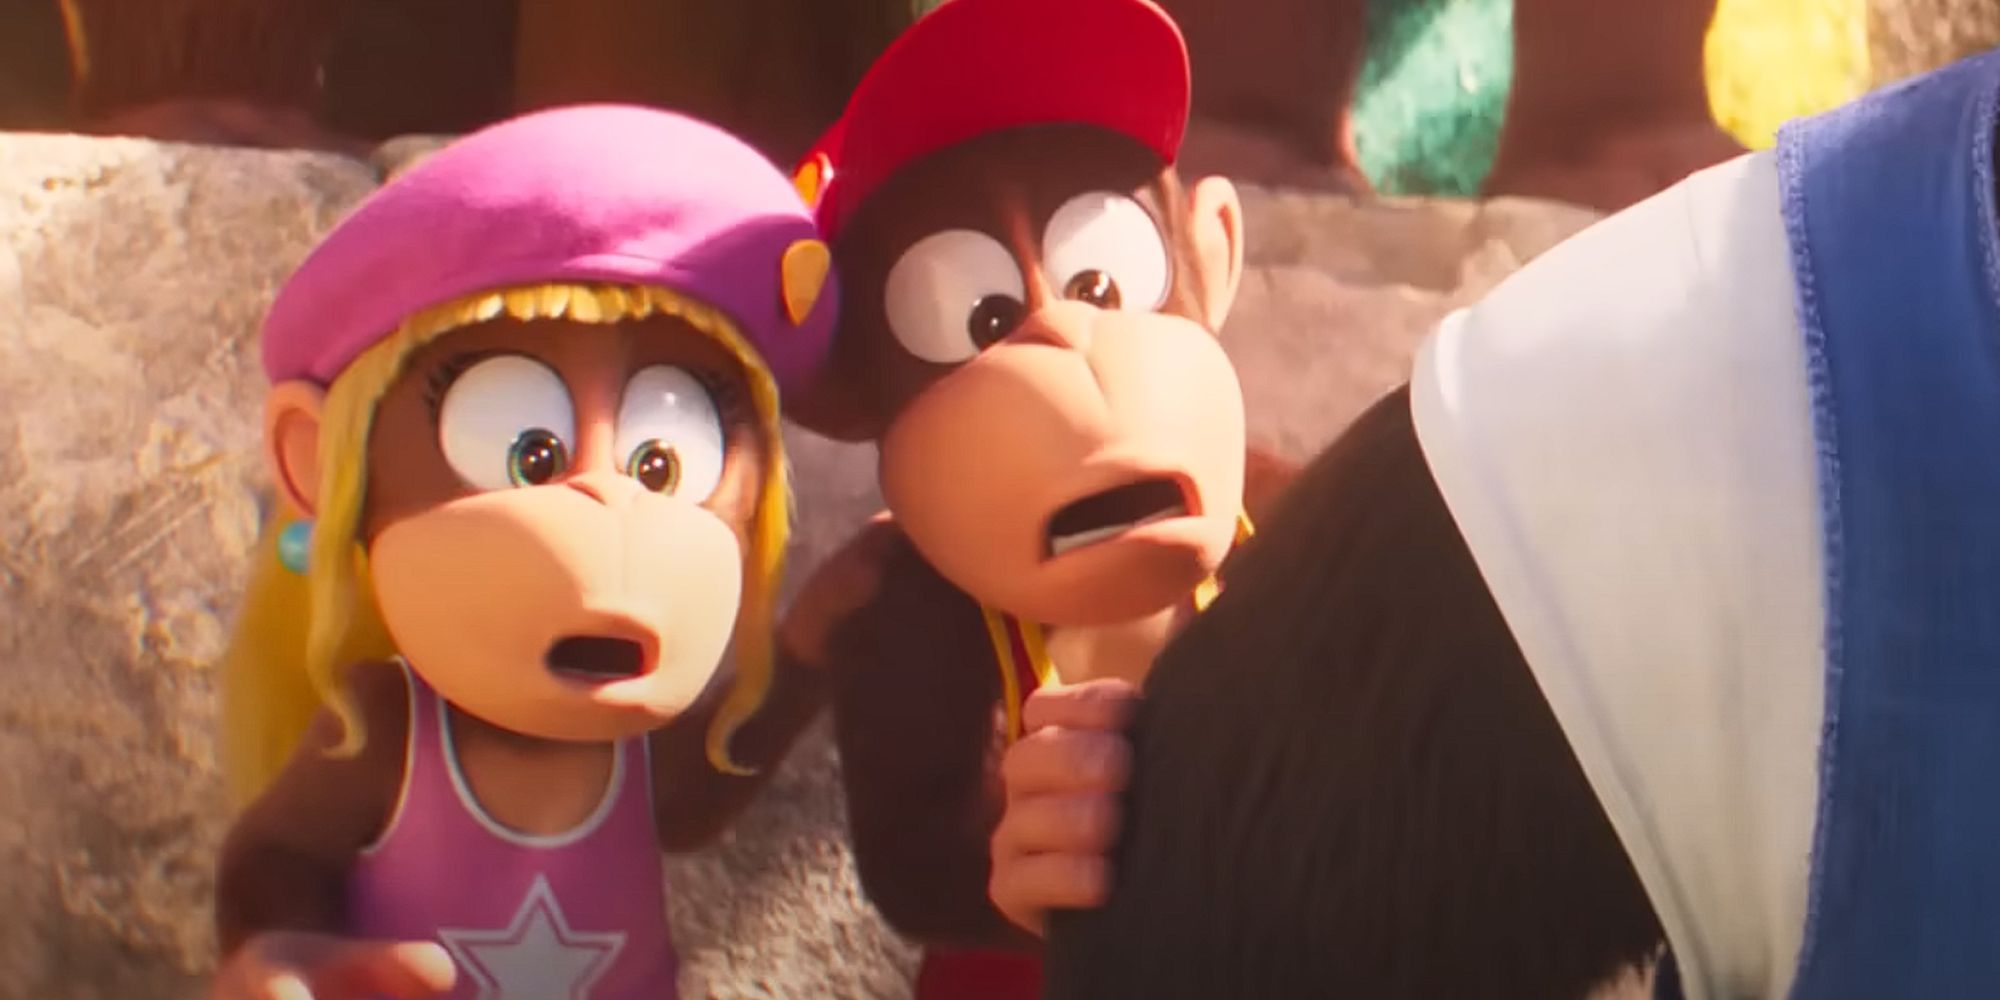 Diddy and Dixie in the Mario movie